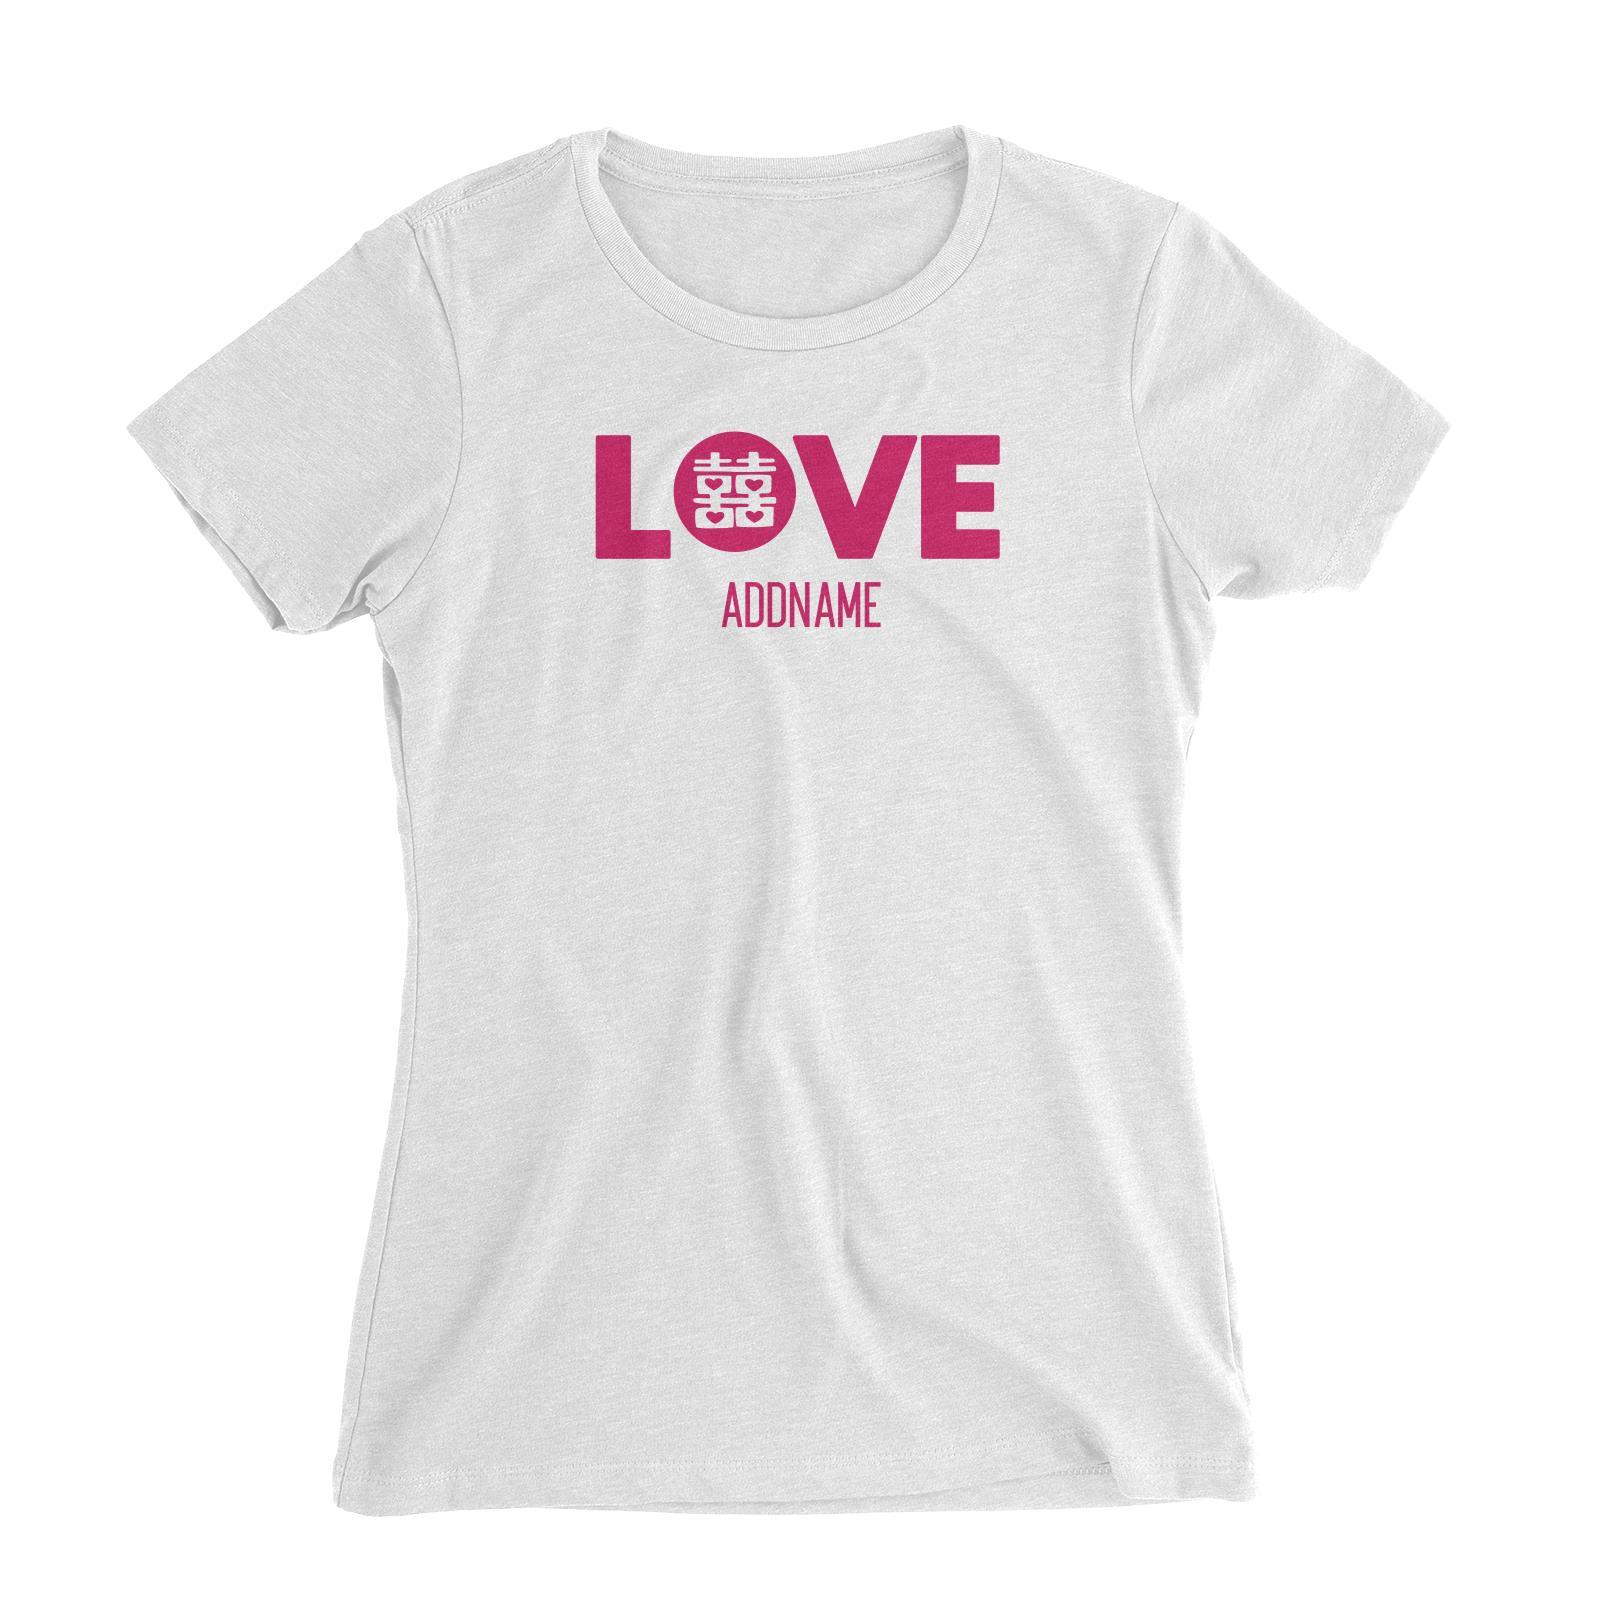 Love In Double Happiness Addname Women Slim Fit T-Shirt